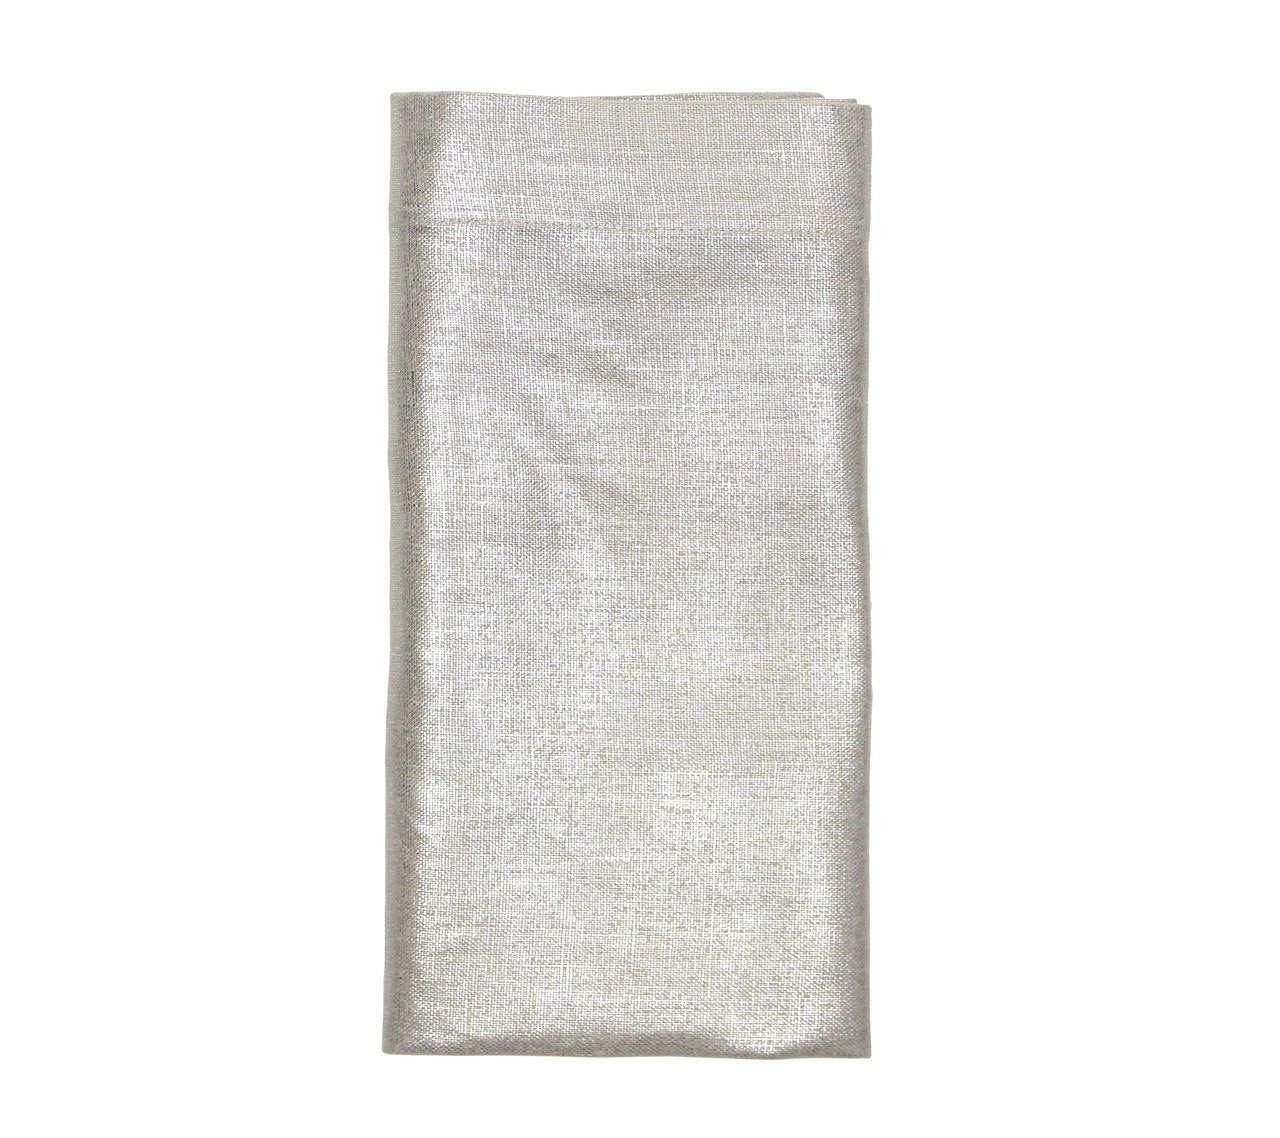 SPECIAL 27 in Linen Napkins SAME PRICE as 24 in Set of 12 while